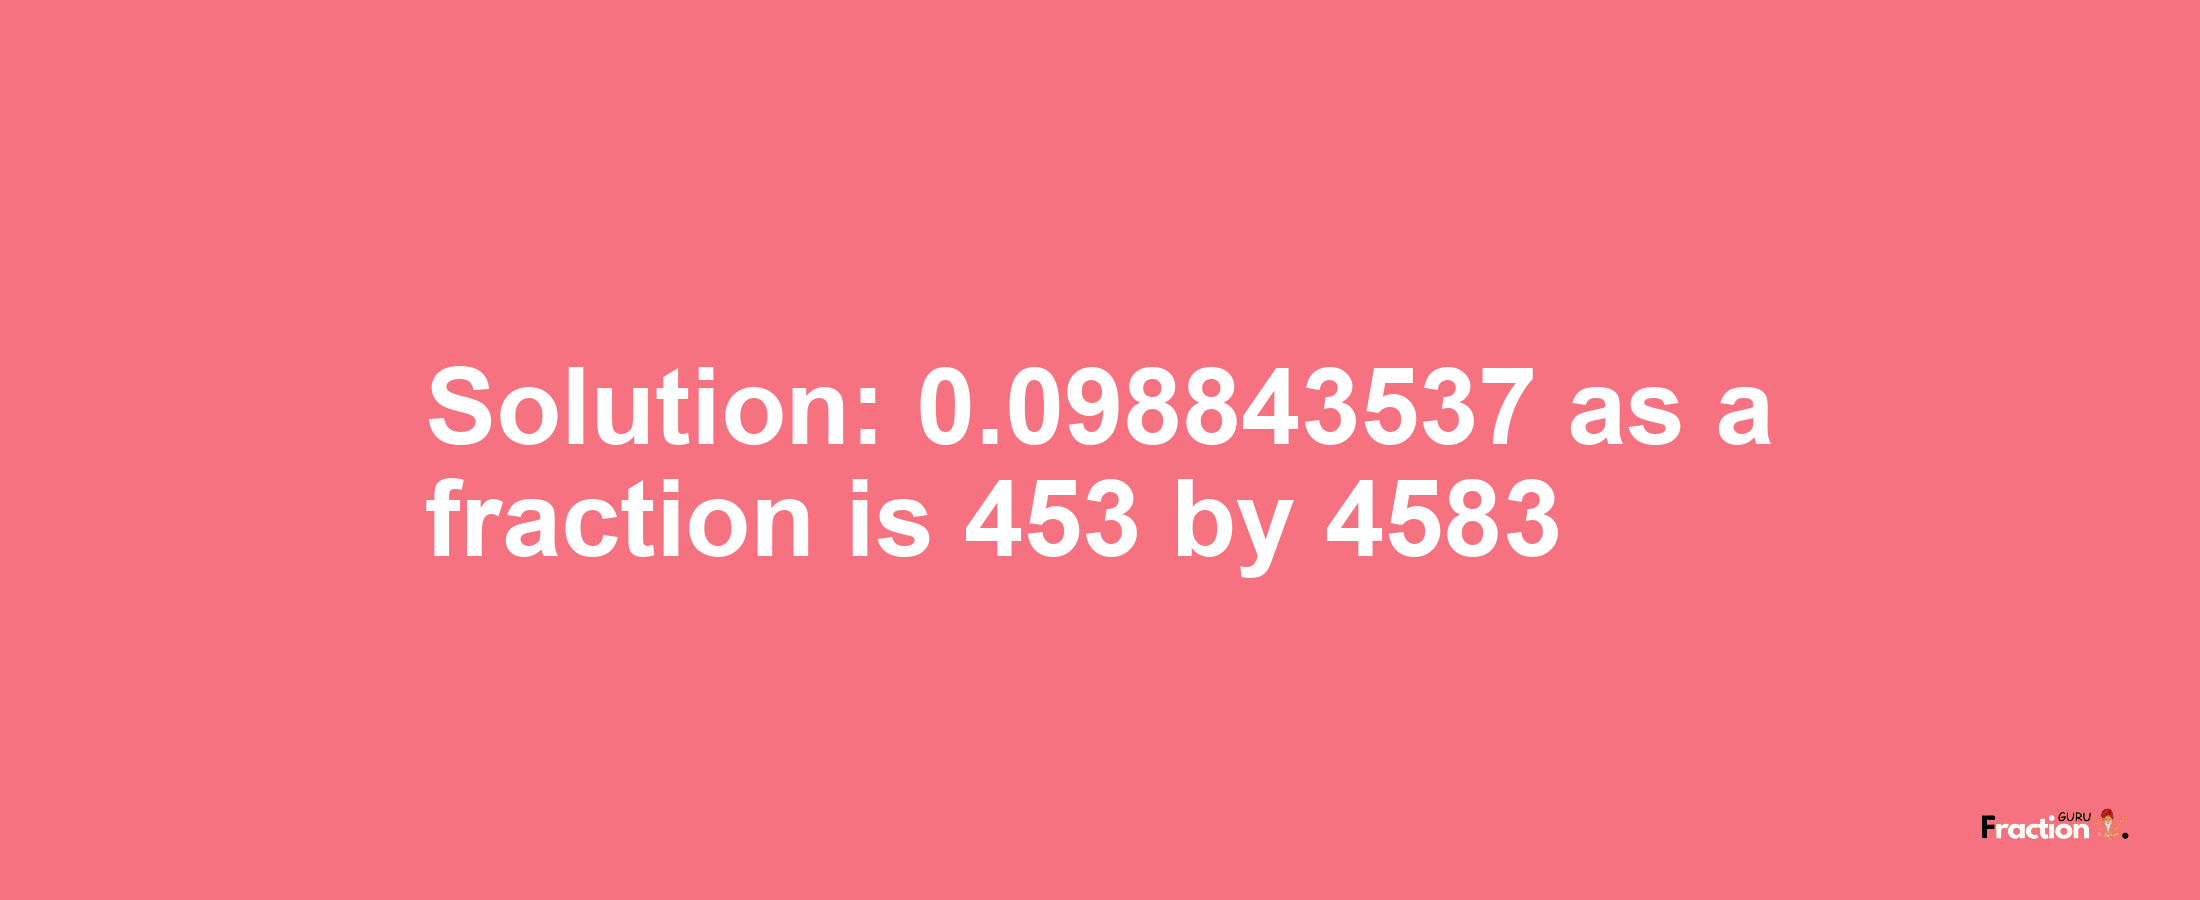 Solution:0.098843537 as a fraction is 453/4583